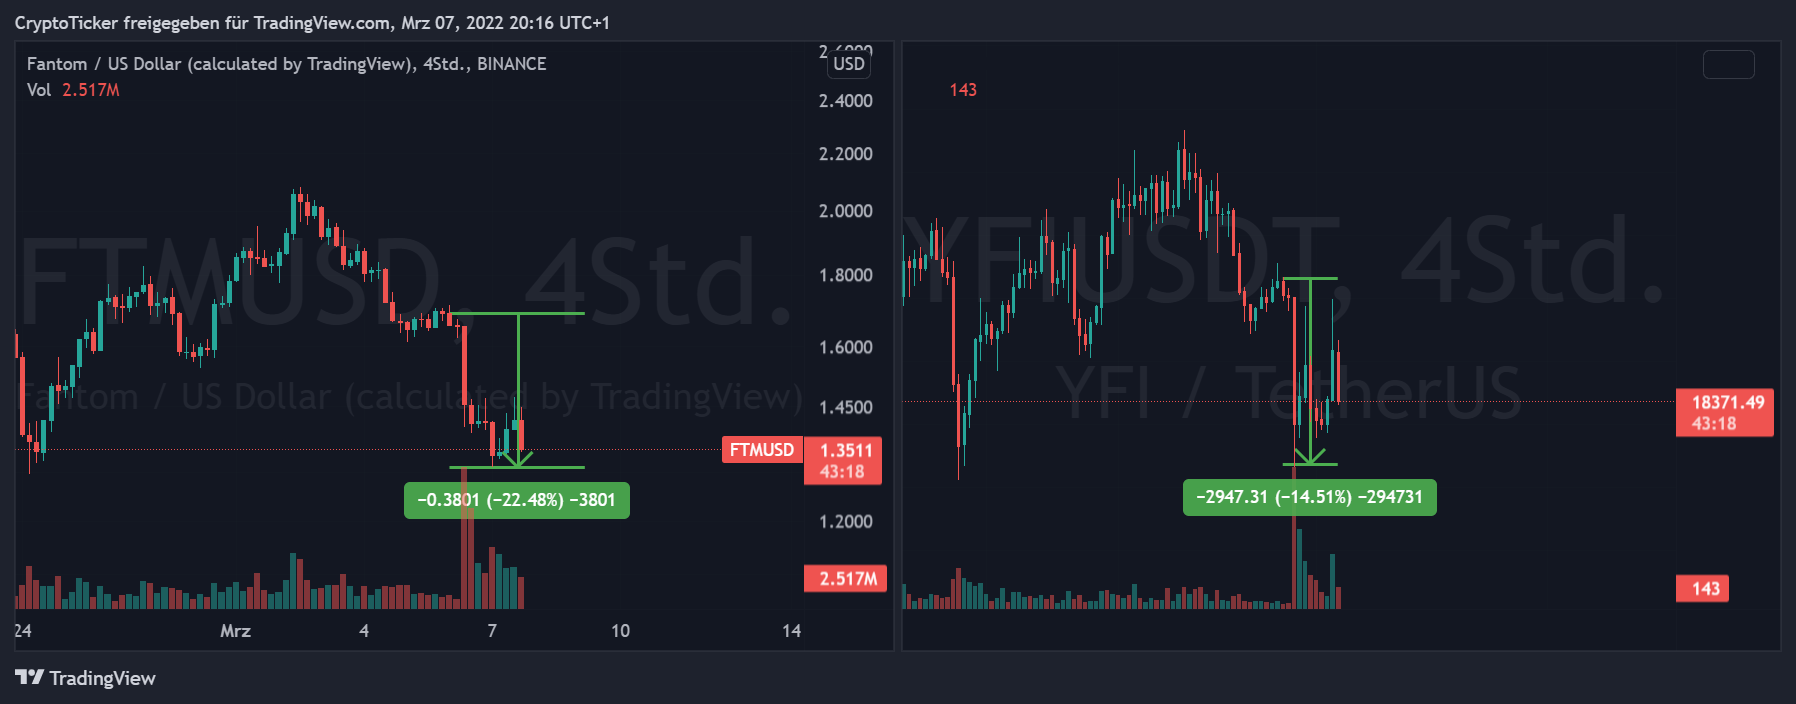 FTM/USD and YFI/USDT 4-hour charts showing the crash following the announcement that Andre Cronje Quits Cryptos